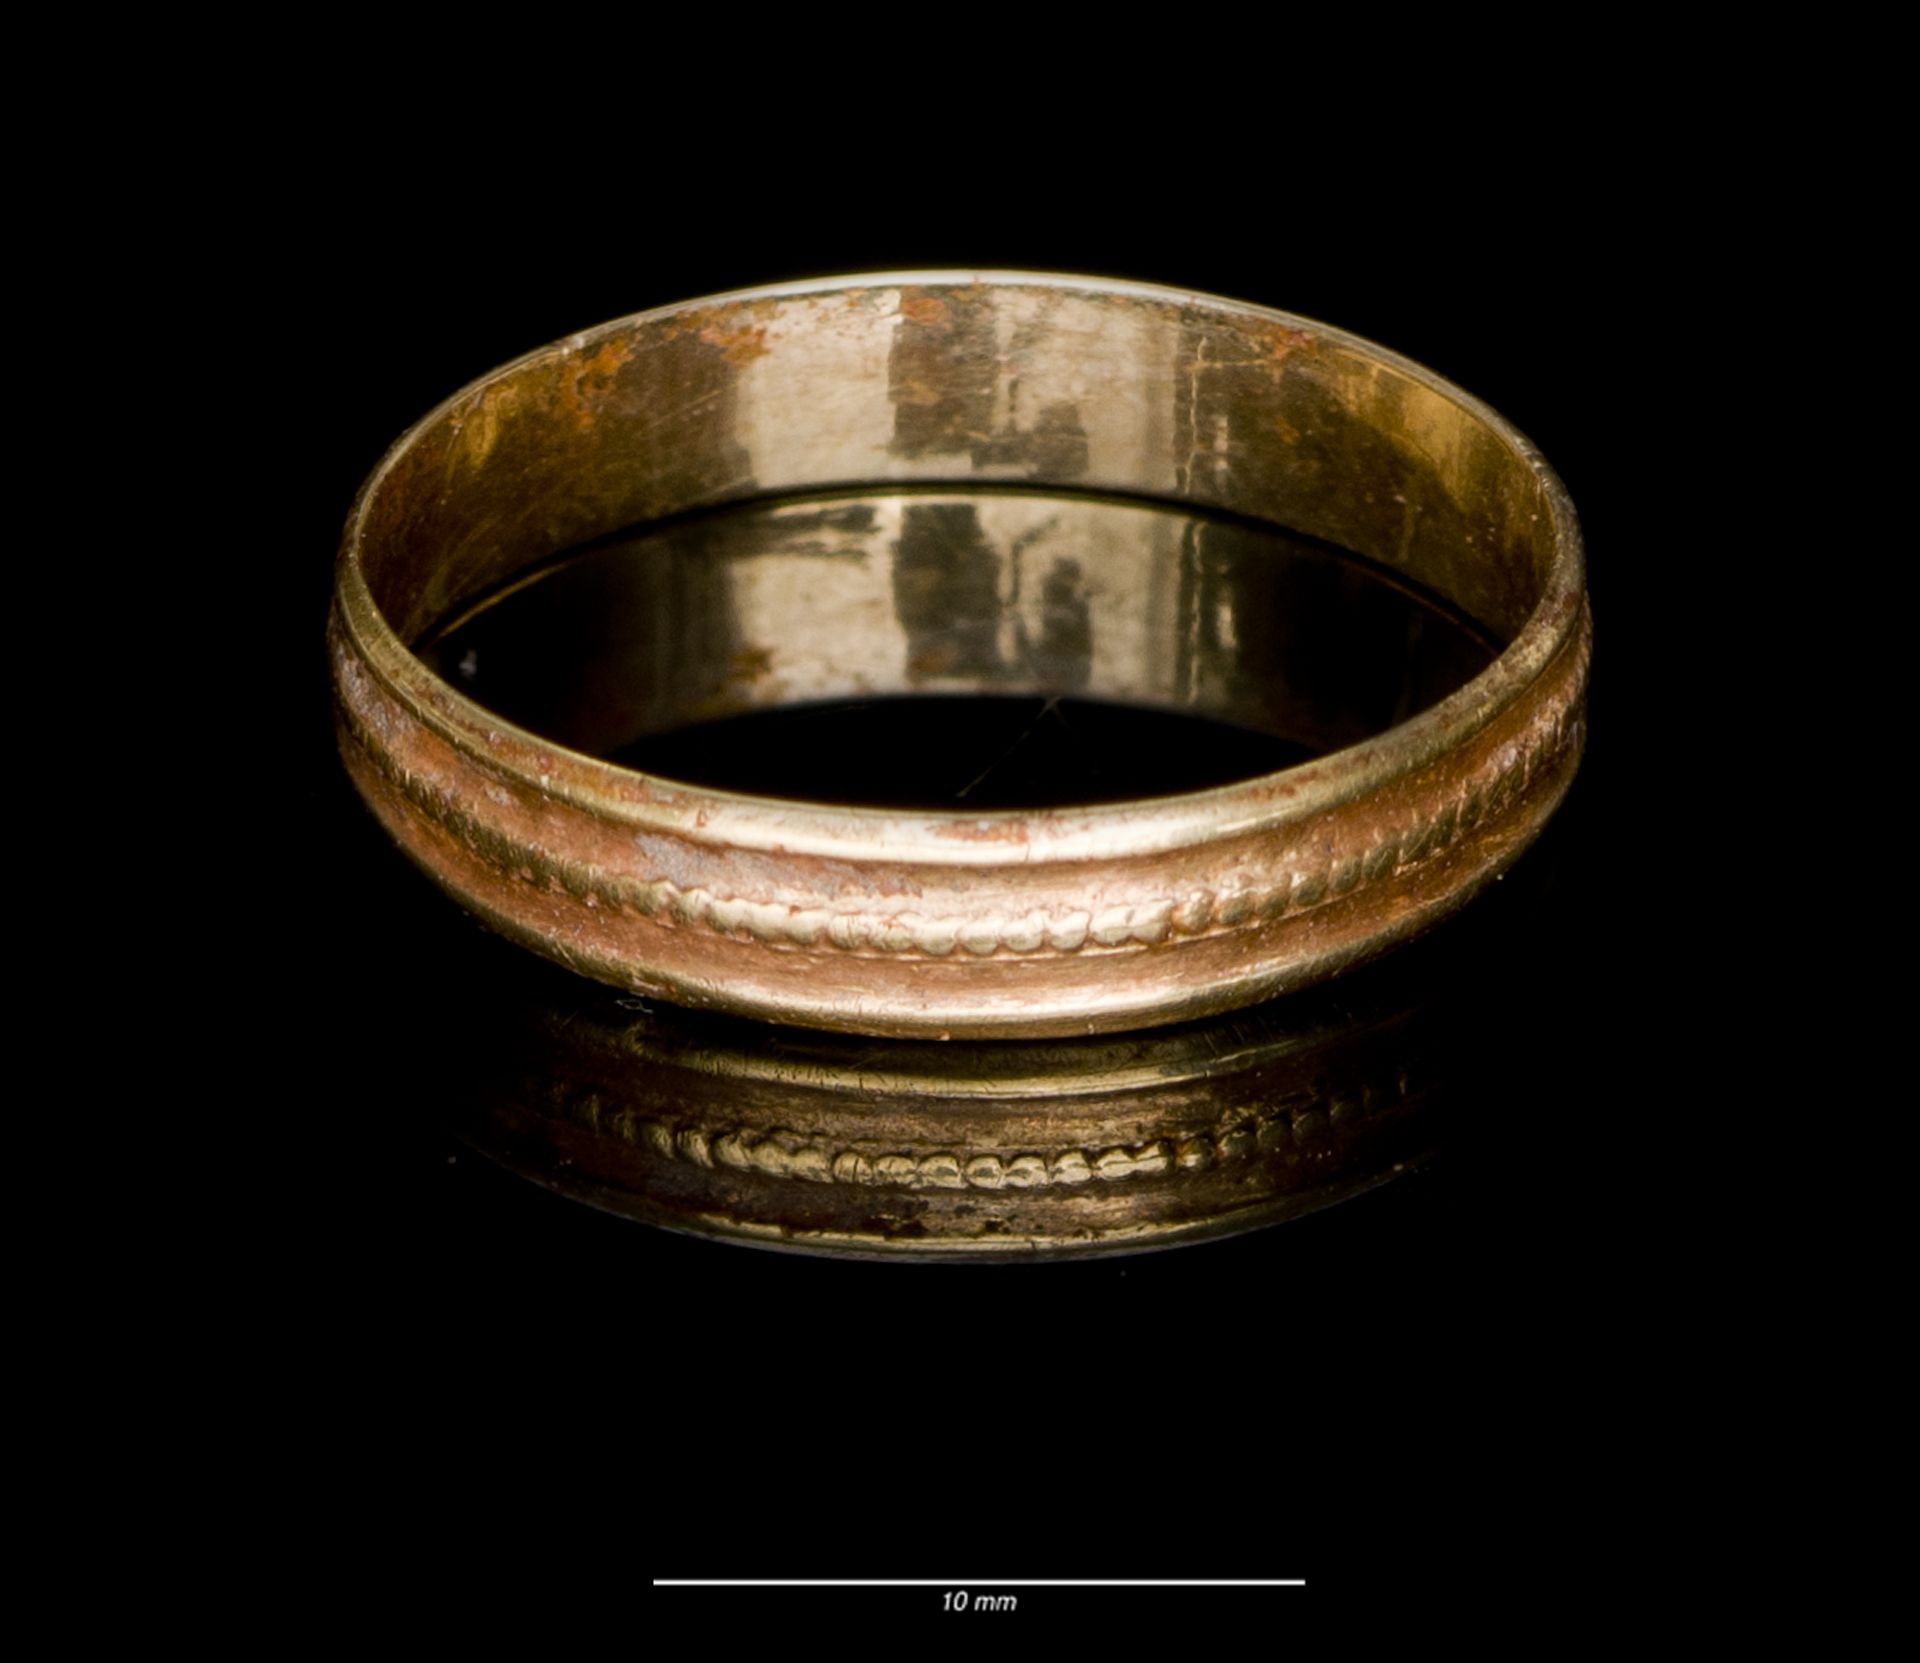 Decorative ring from Holt